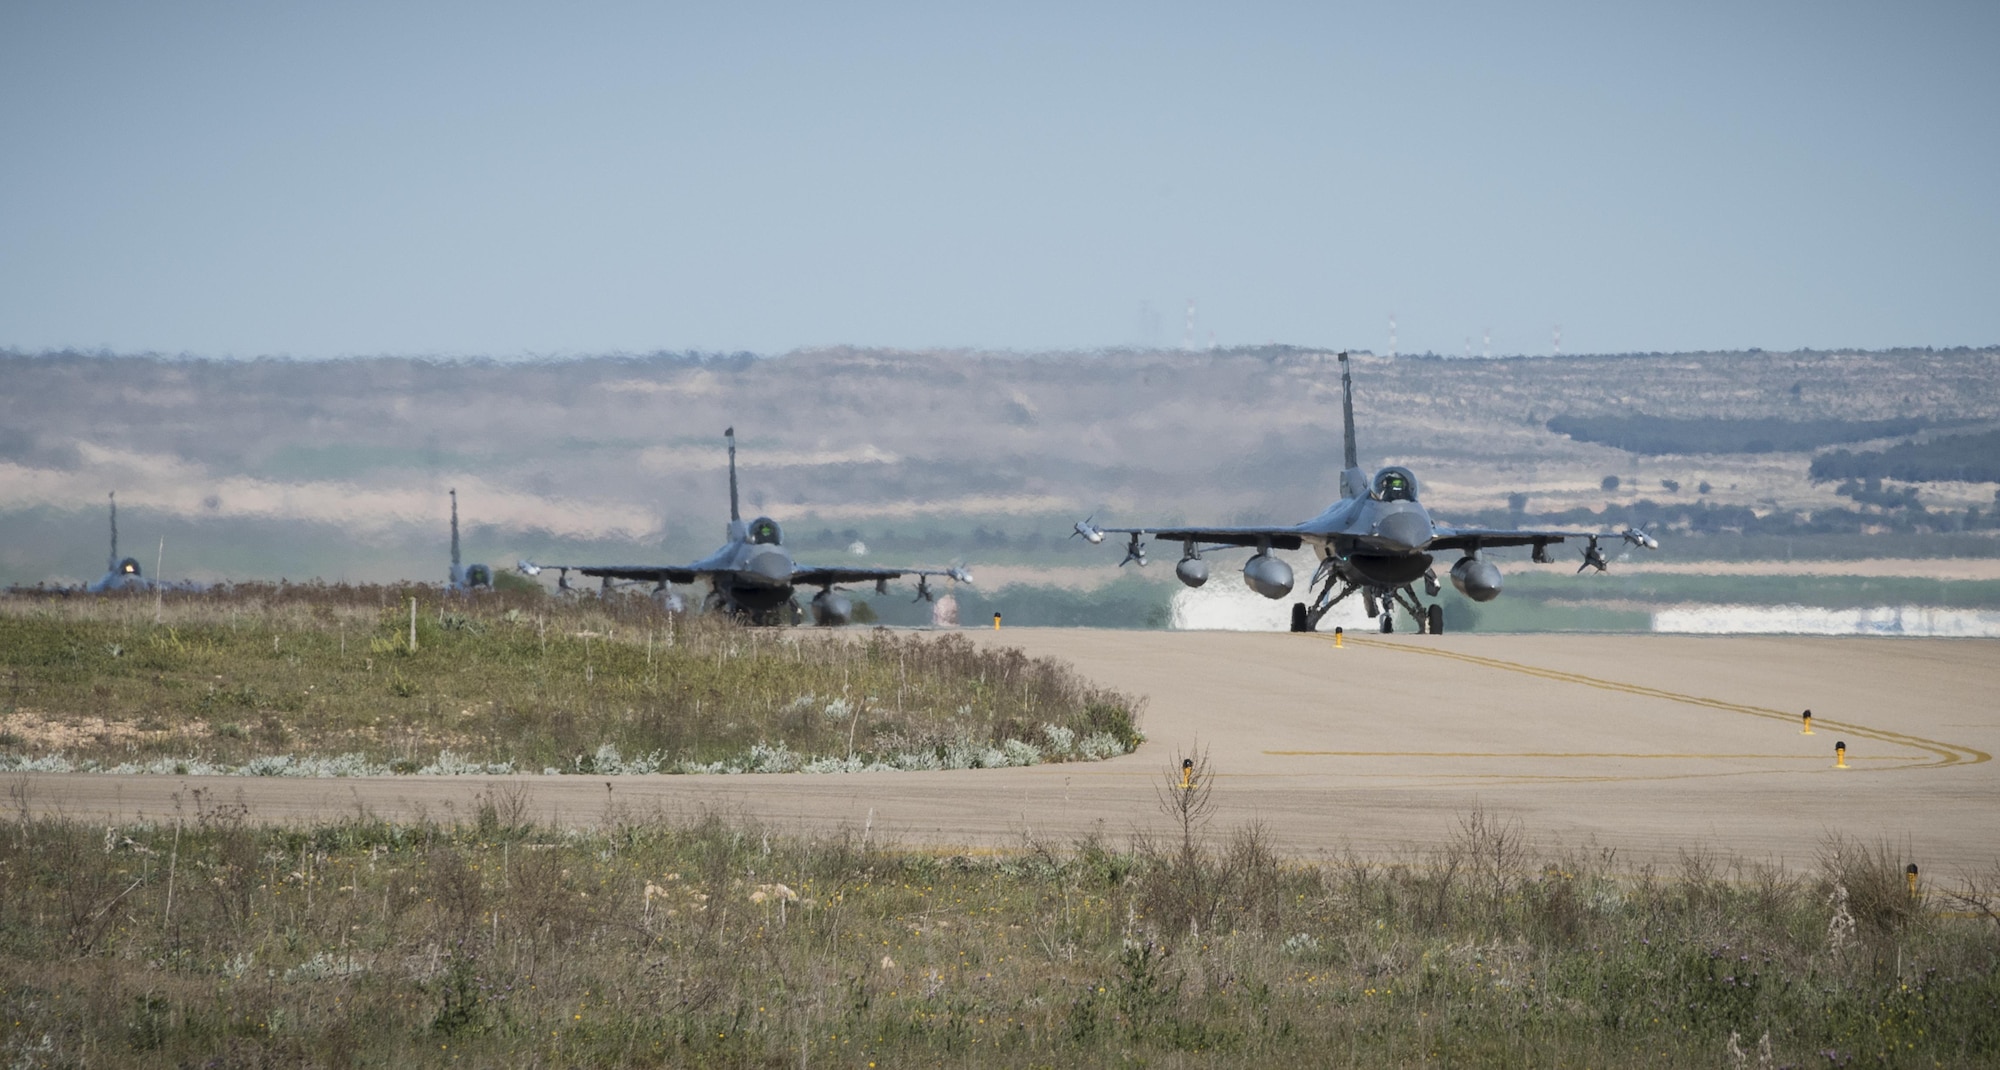 F-16 Fighting Falcons from Hill Air Force Base, Utah, taxi down the runway April 21, 2017, at Albacete Air Base, Spain, to participate in the Tactical Leadership Programme. TLP is an annual NATO Mission Commander’s School training program designed to provide joint tactical training with NATO allies to increase NATO coordination and strengthen combined air operations. This type of training is an opportunity for Hill’s active duty and Reserve Airmen to hone their operational and tactical leadership skills with allied air forces. (U.S. Air Force photo/Senior Airman Justin Fuchs)